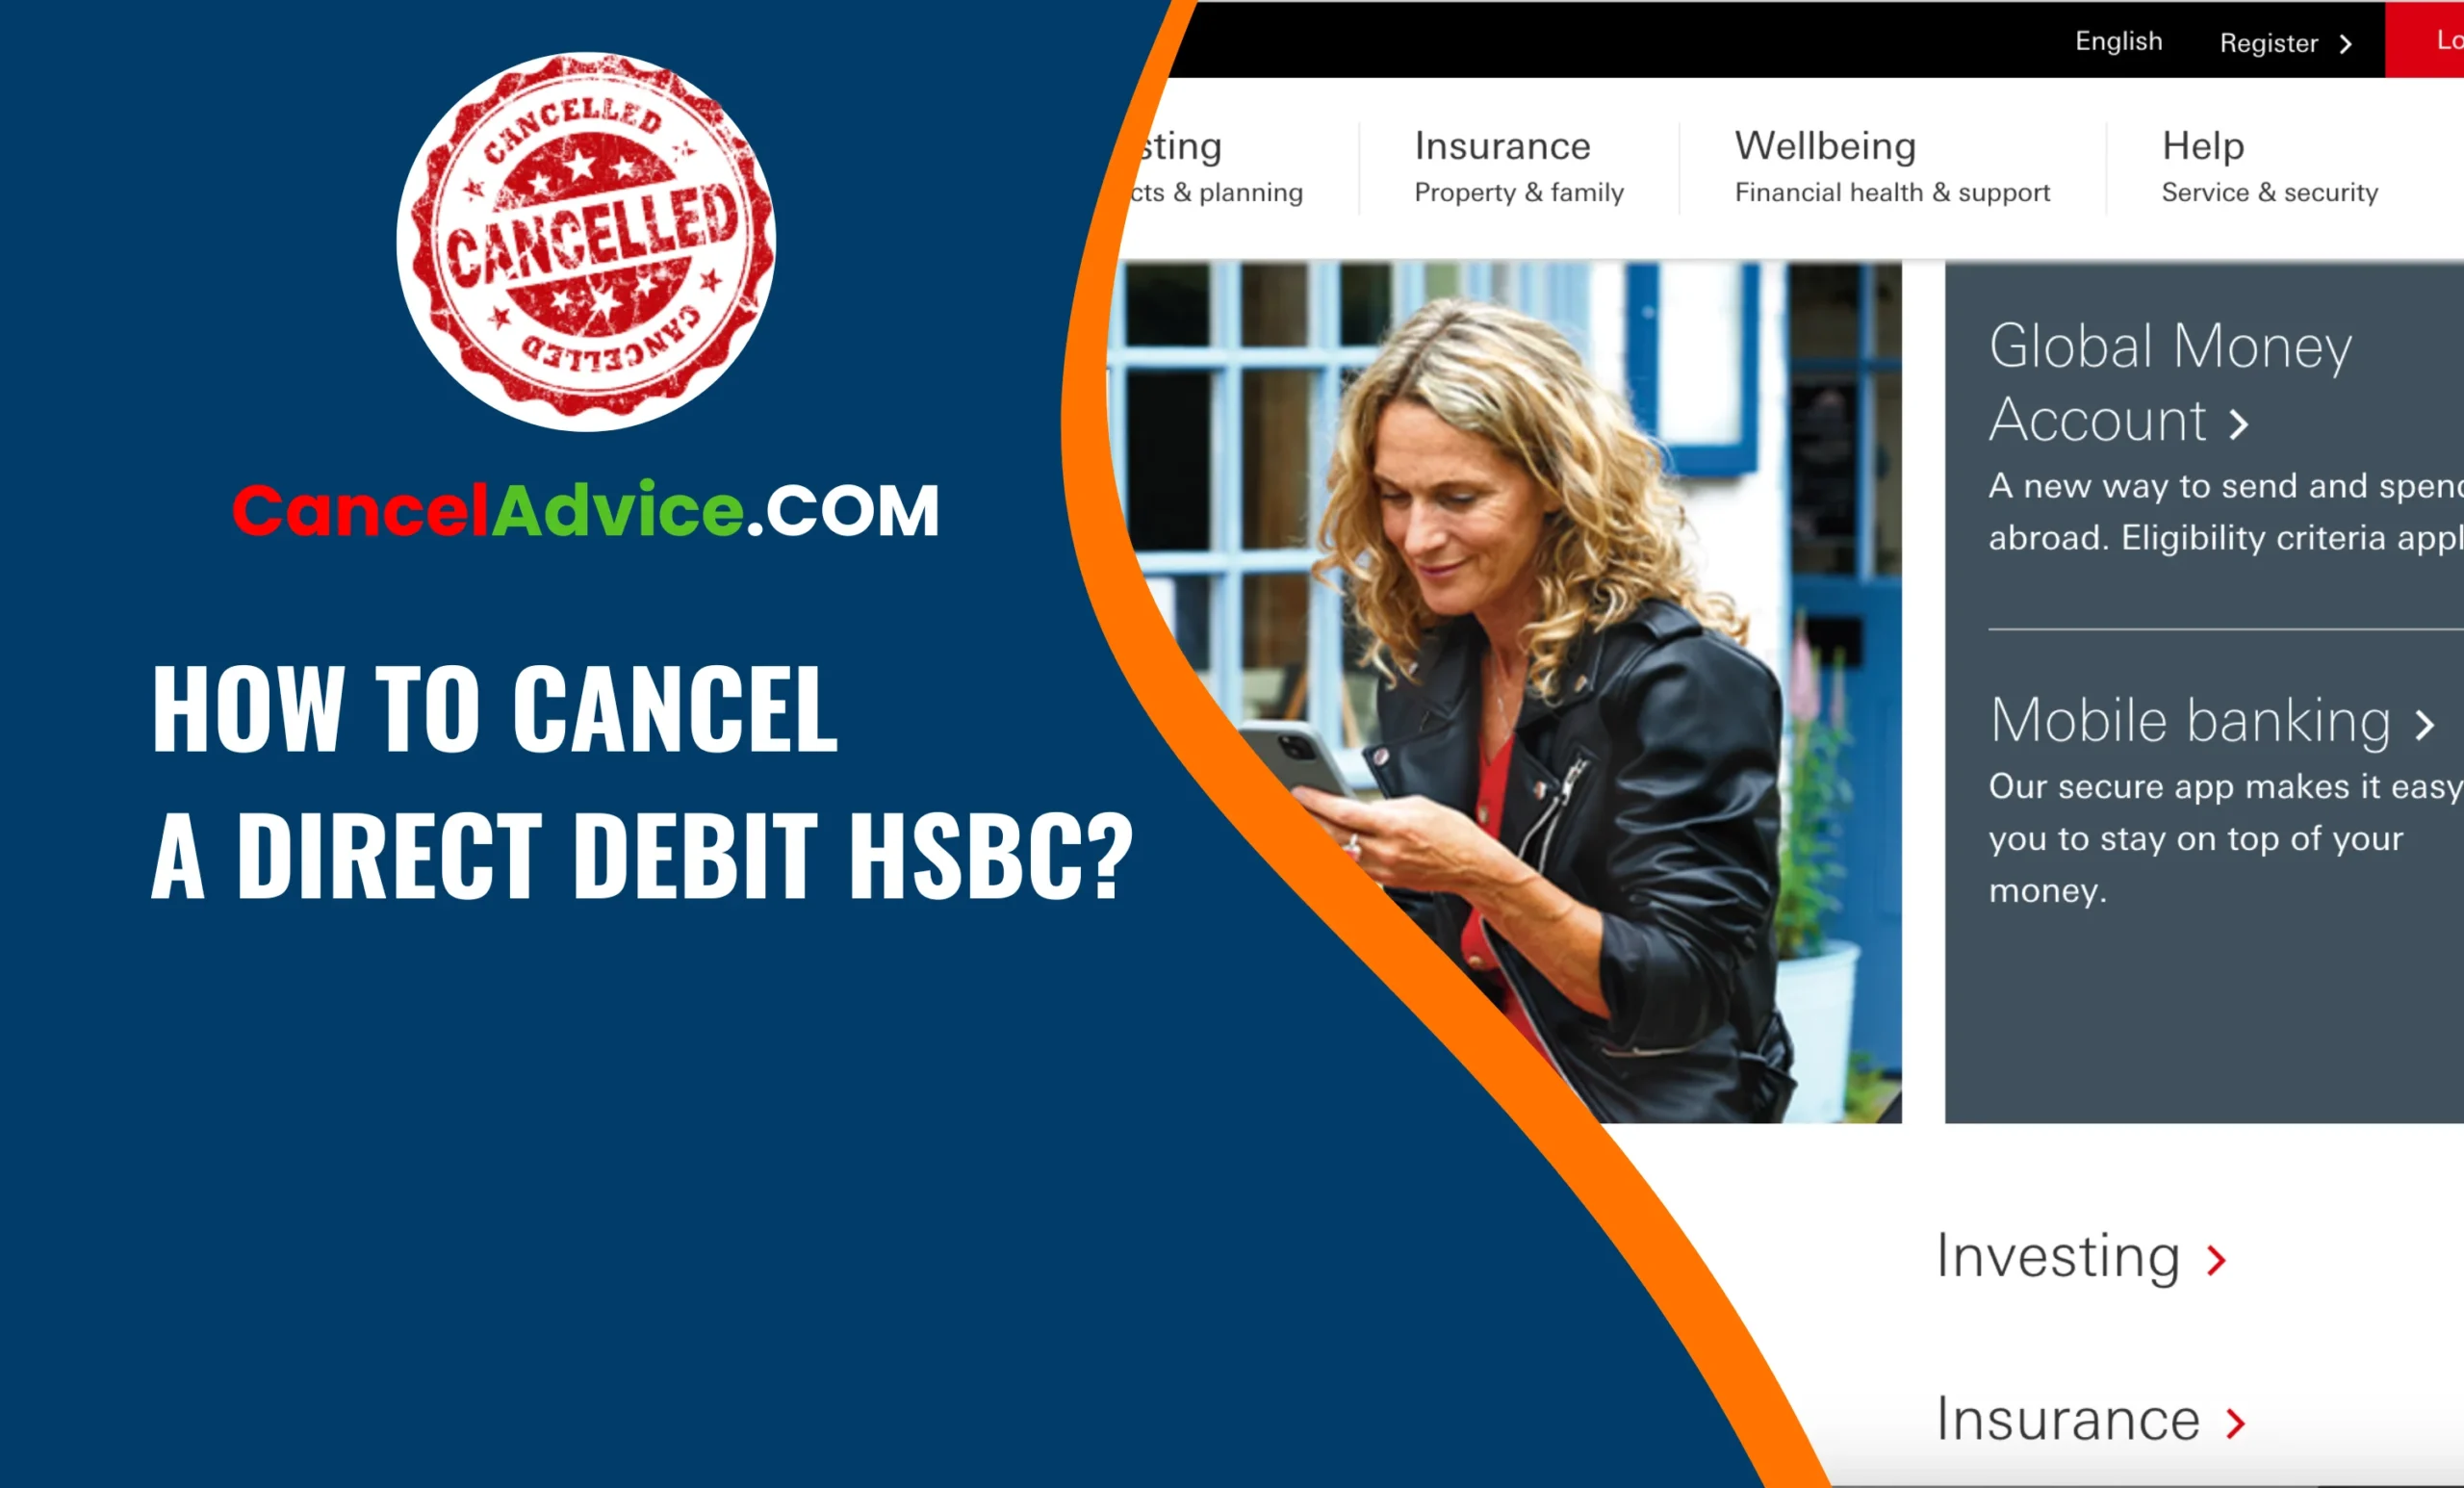 How To Cancel A Direct Debit HSBC